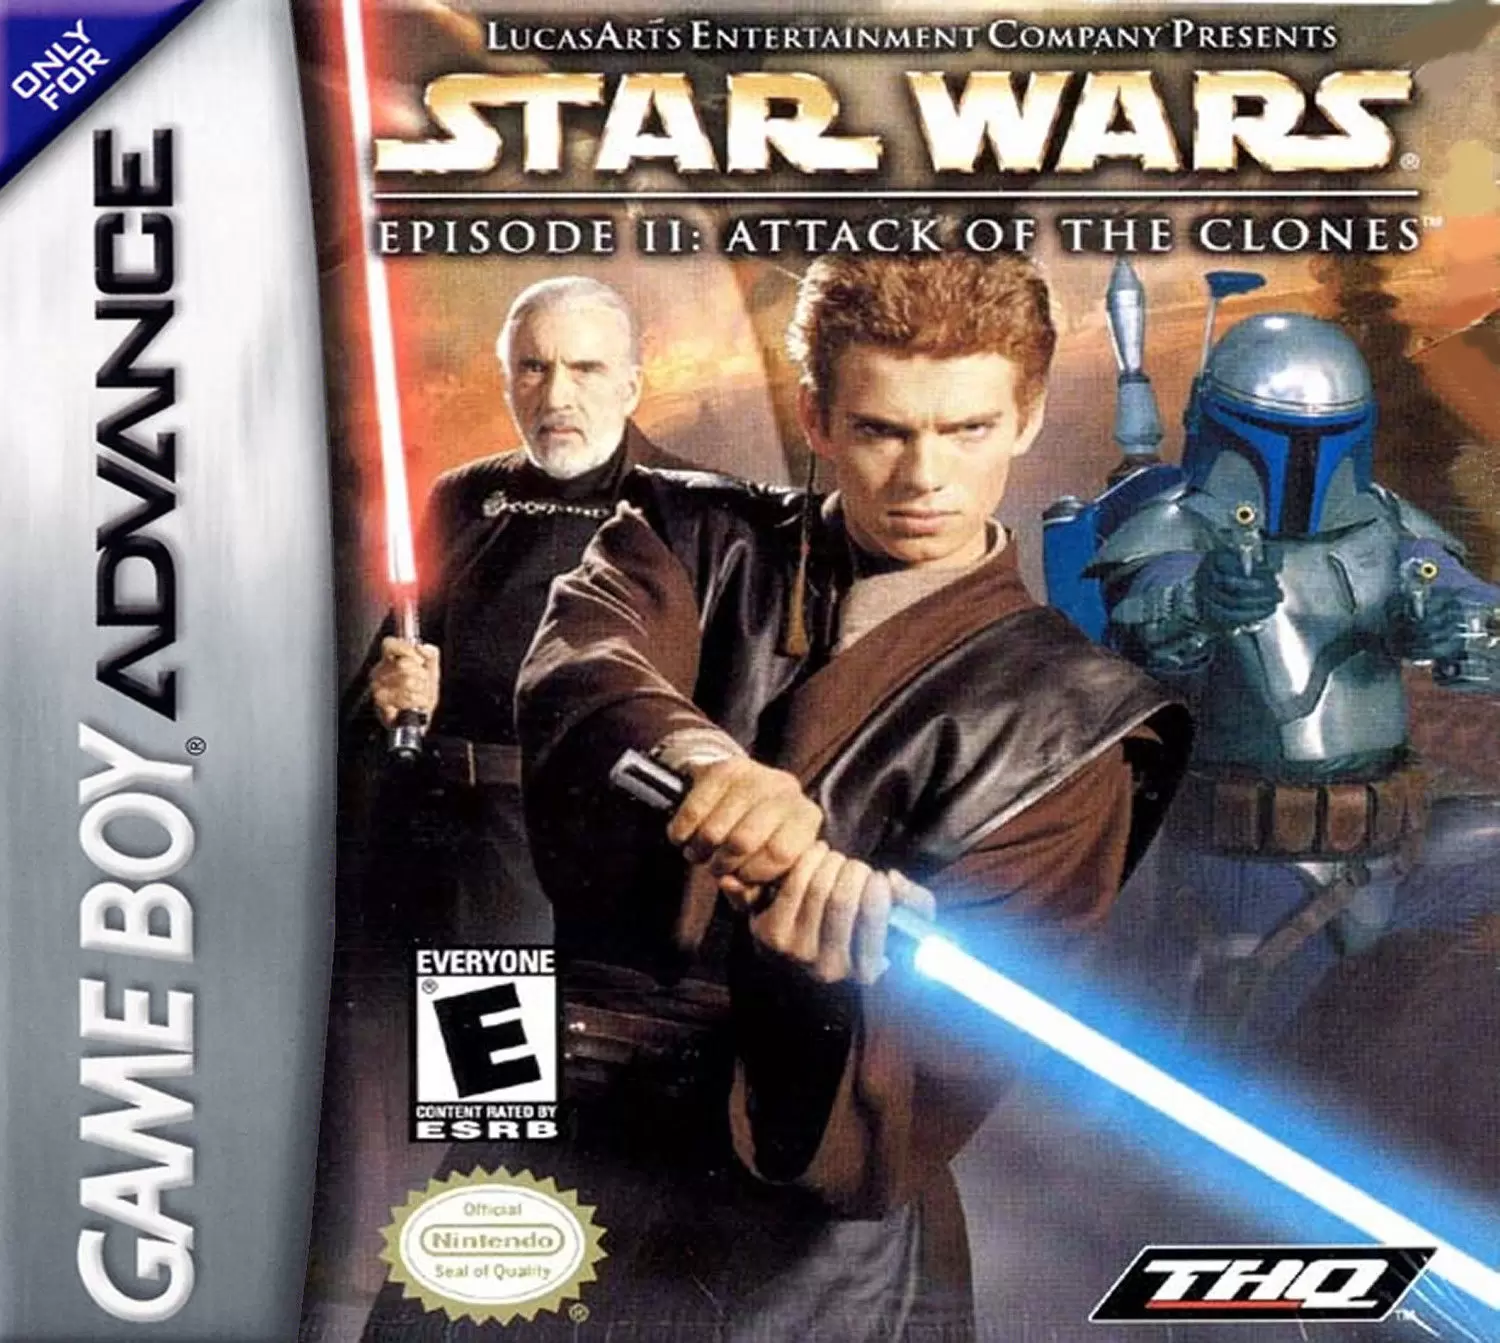 Game Boy Advance Games - Star Wars: Episode II: Attack of the Clones